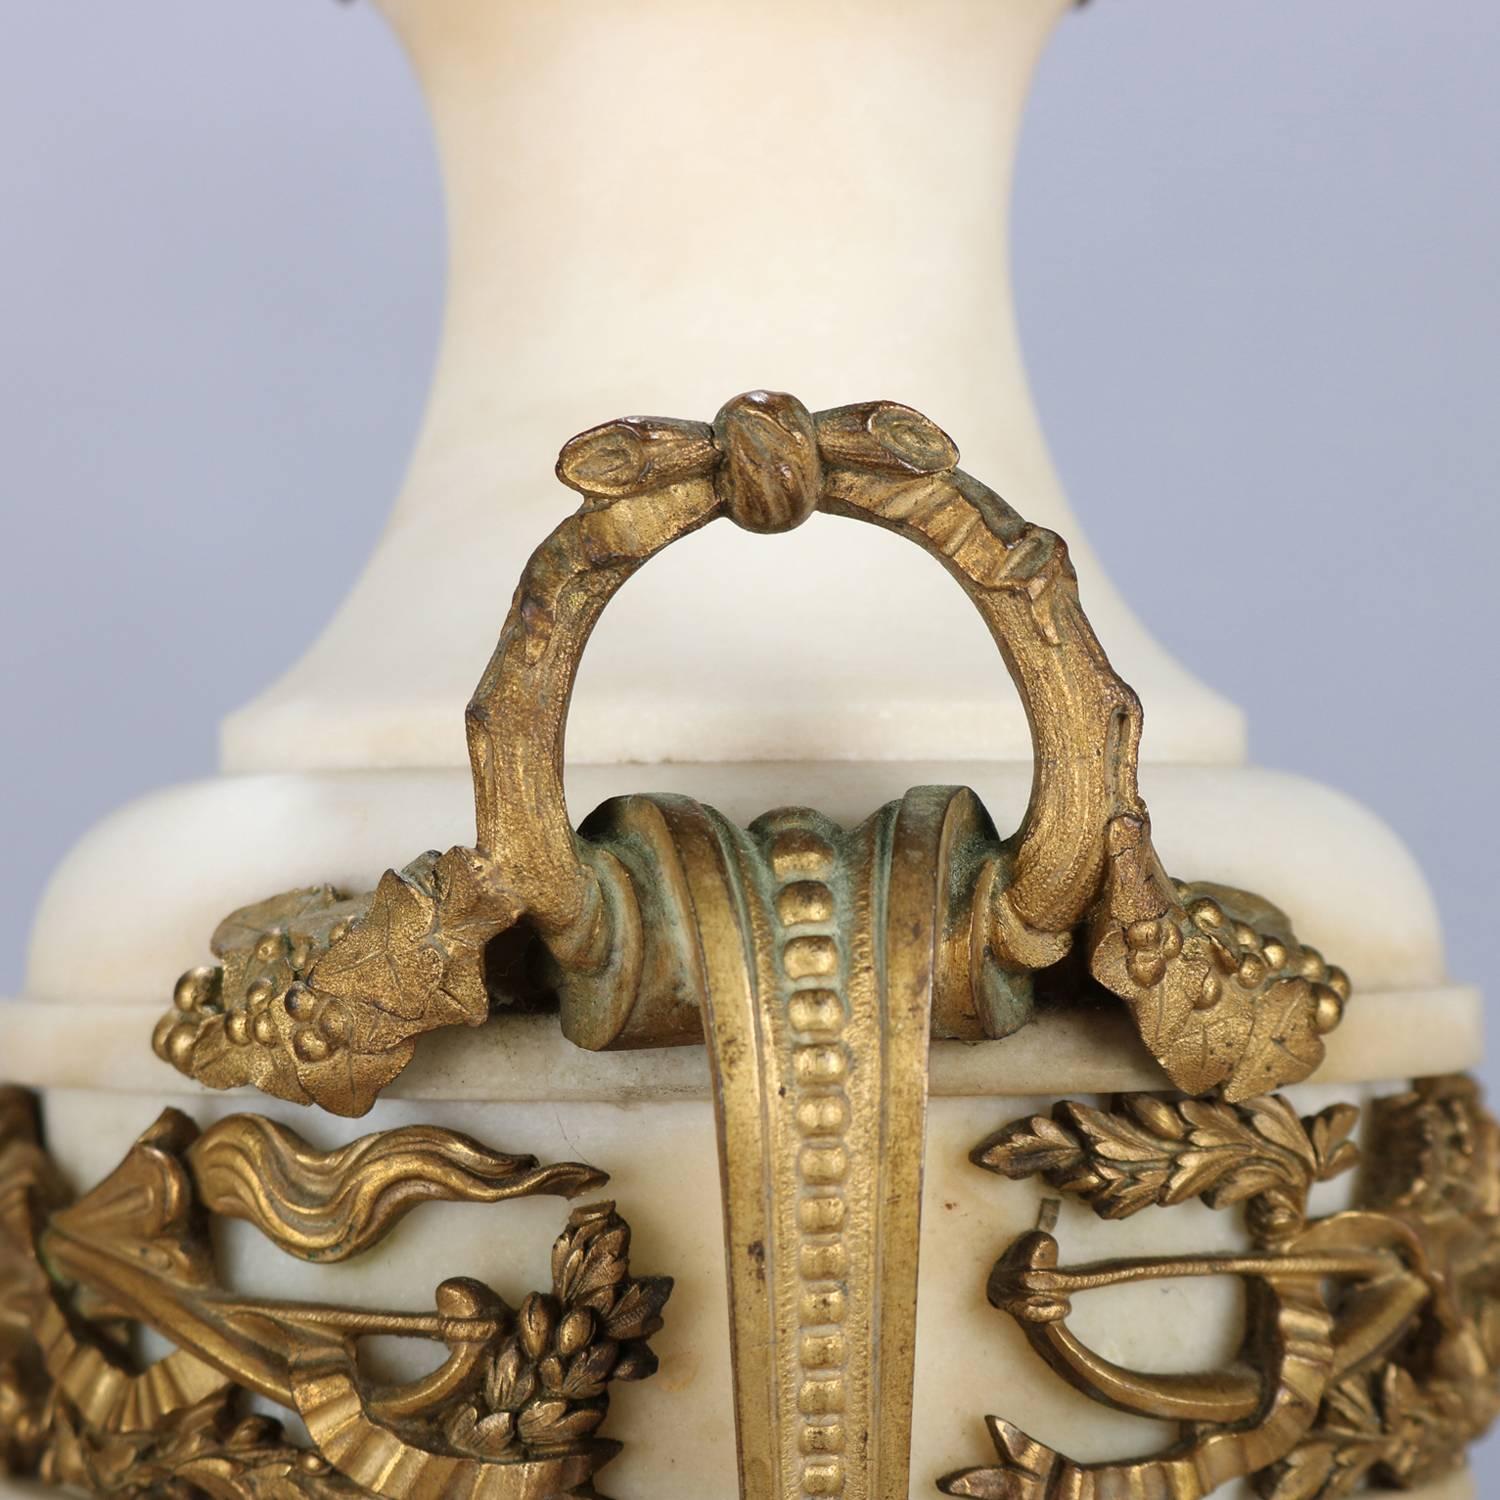 Pair of oversized French Classical candelabra feature urn form with gilt bronze mounts including five scroll and foliate form branch arms with central flame finial, two laurel wreath form handles, upper band is pierced with Victory torch and floral